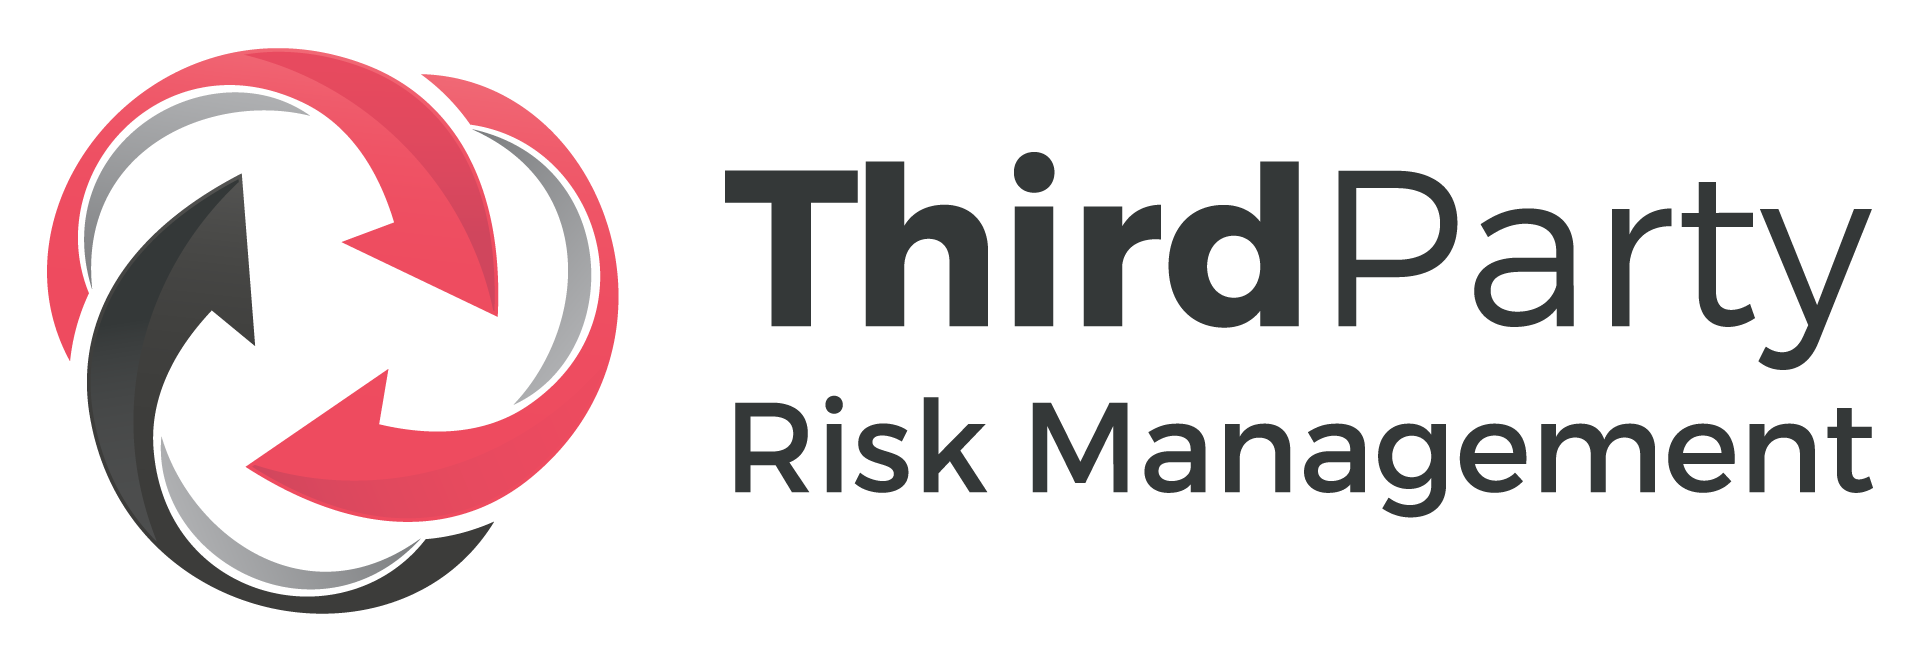 ThirdParty Risk Management logo